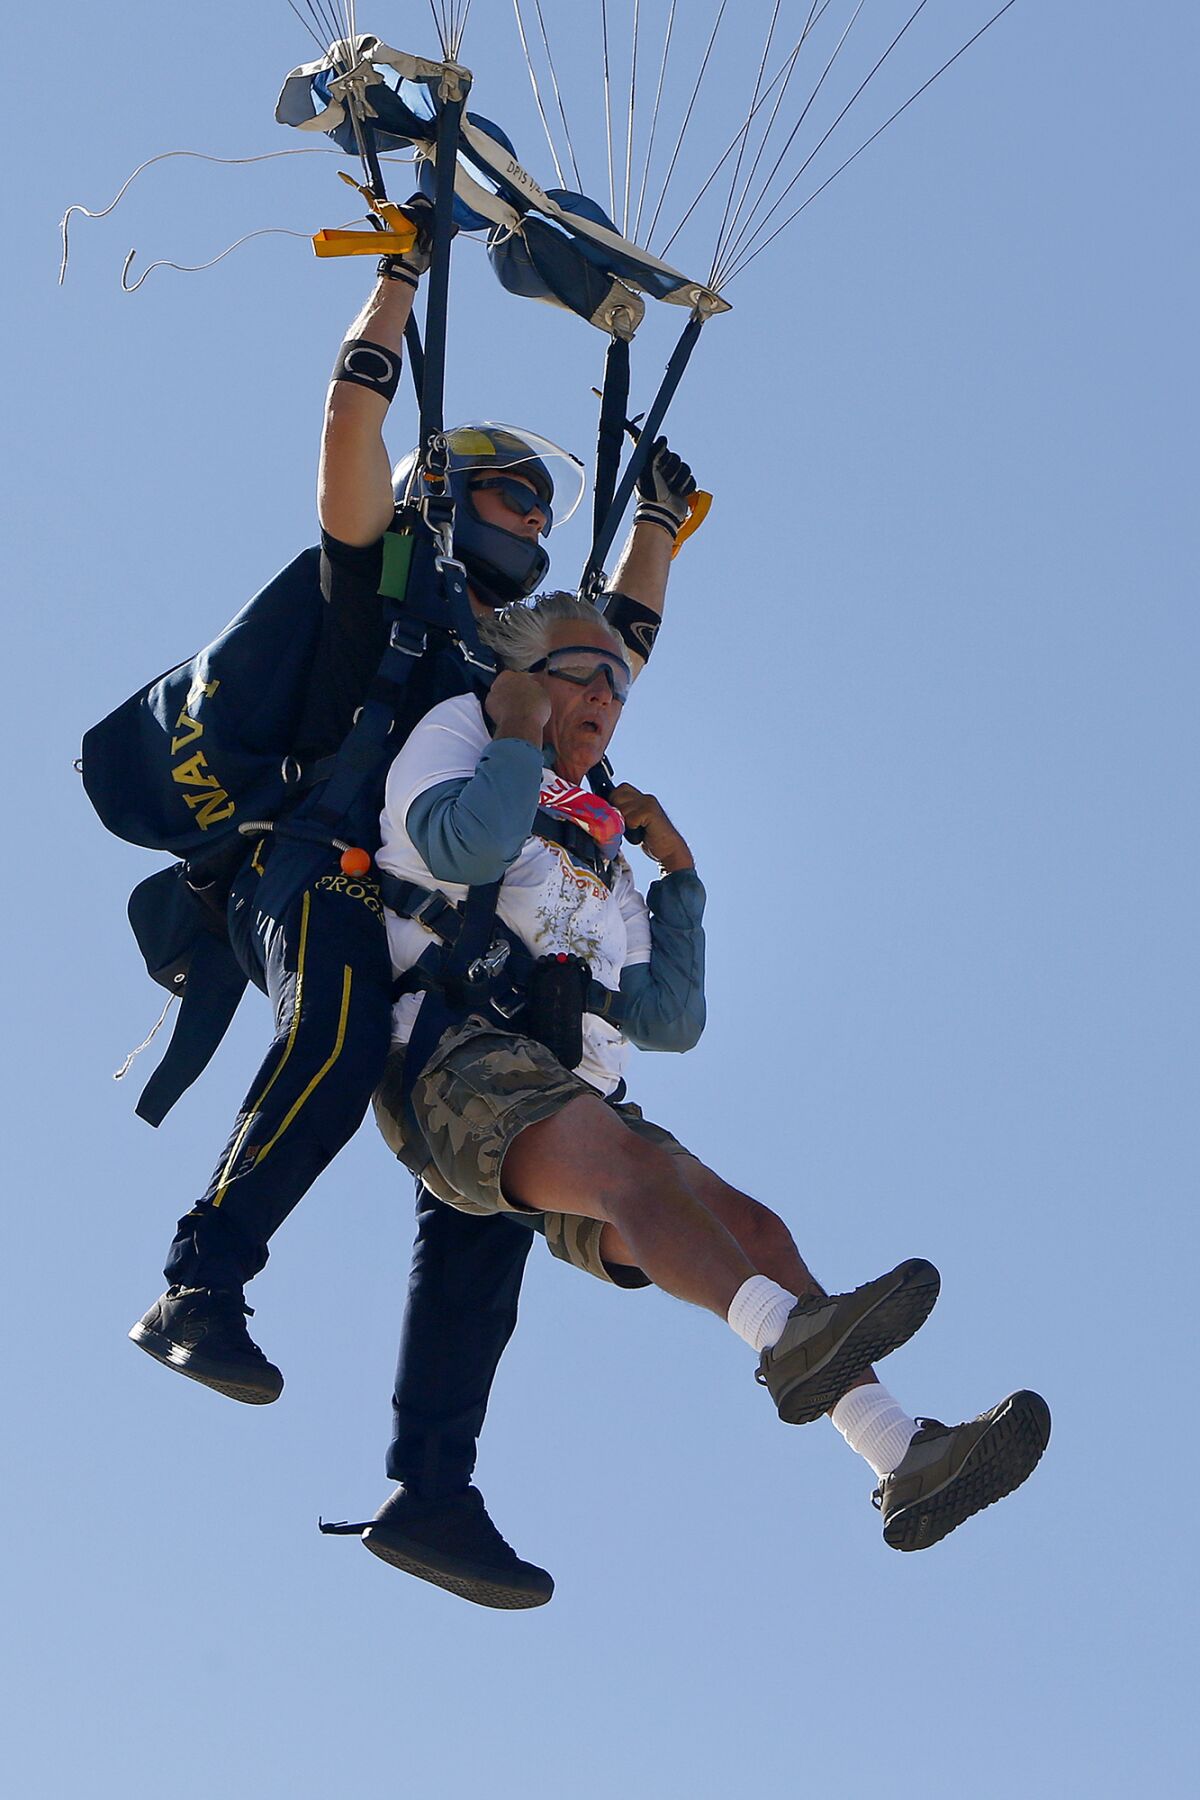 Don Ramsey, right, glides in for a landing after tandem jumping out of a plane with the U.S. Navy Leap Frogs on Thursday.